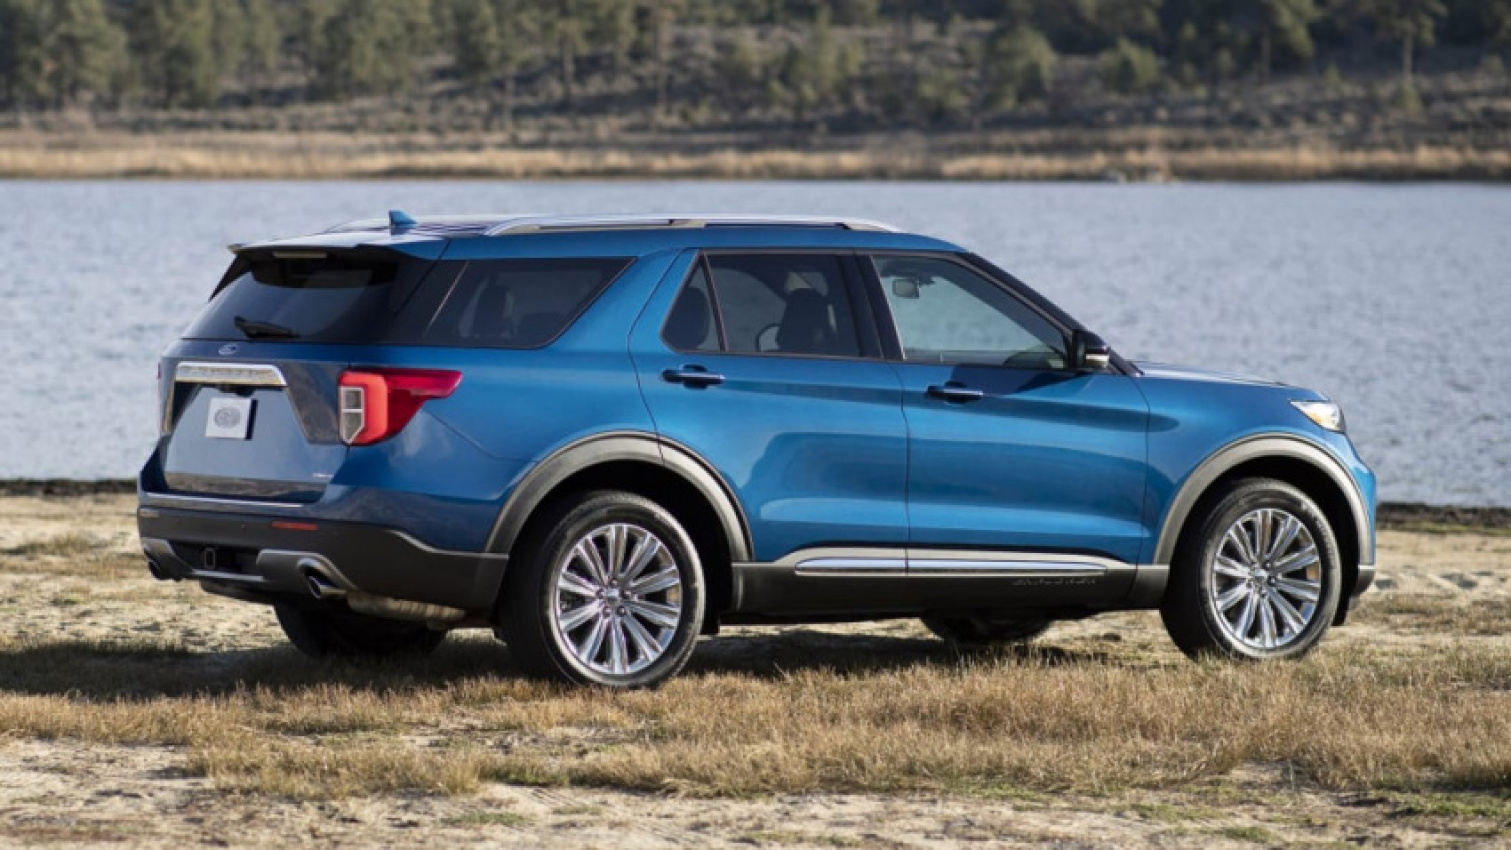 autos, cars, ford, lincoln, ford explorer, lincoln aviator, luxury, recalls, safety, 2022 ford explorer, lincoln aviator recalled over fire risk